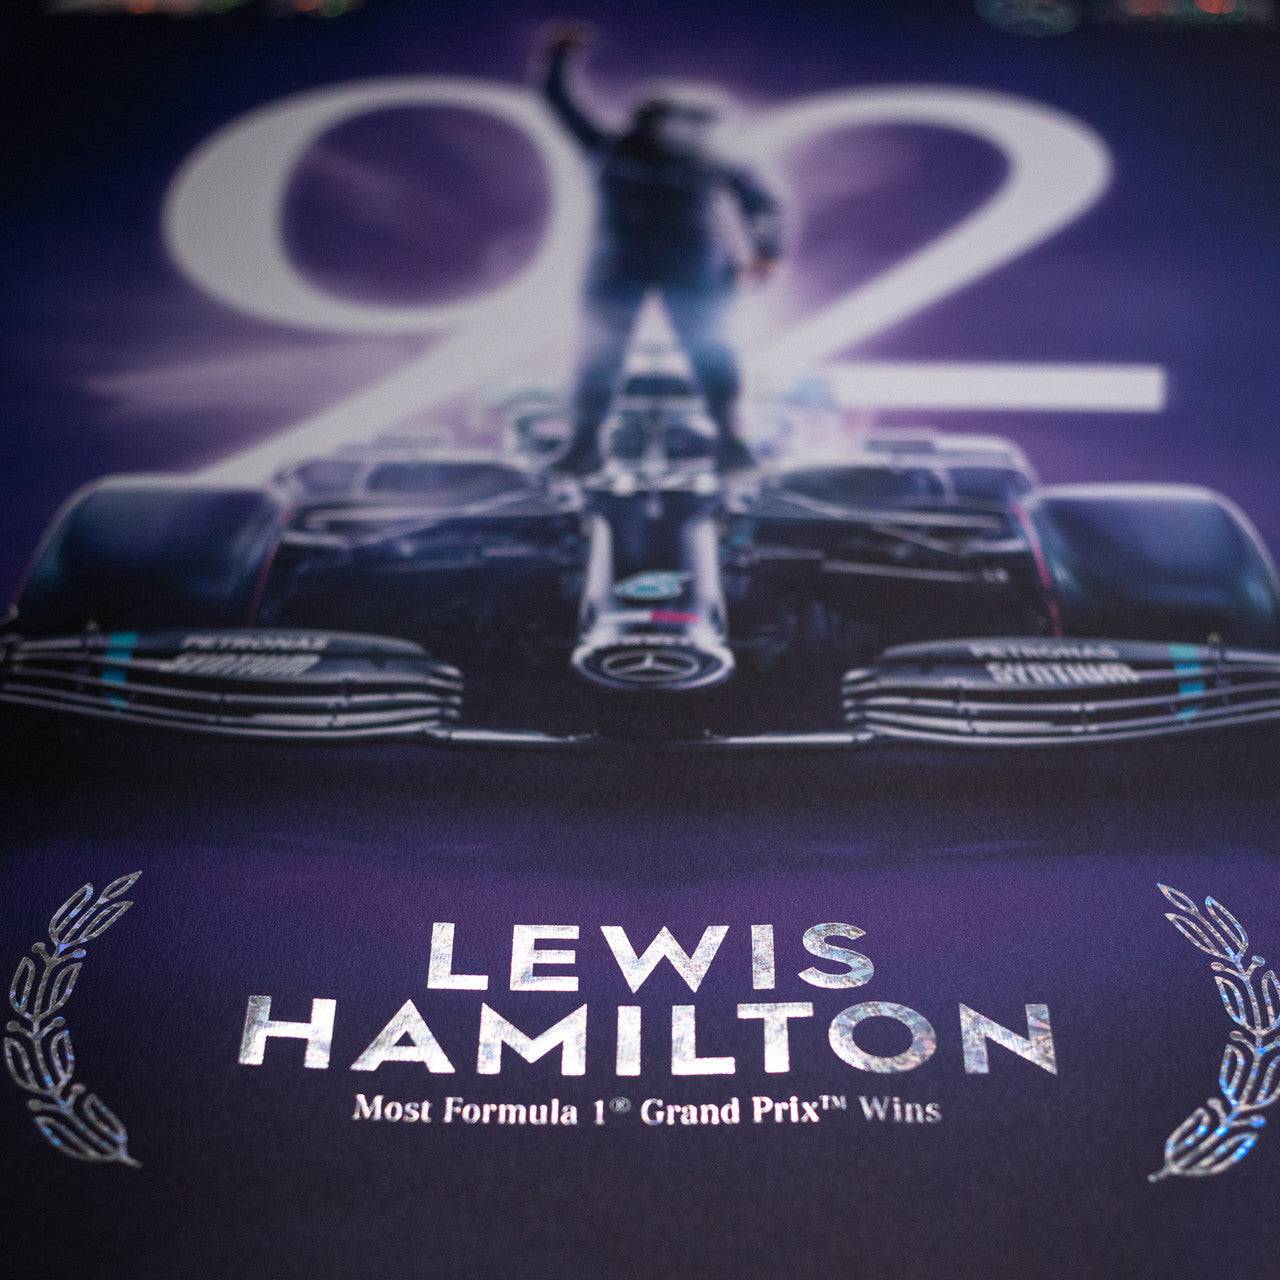 Mercedes-AMG Petronas F1 Team - 92nd Record-Breaking Win | Lewis Hamilton Edition - Poster